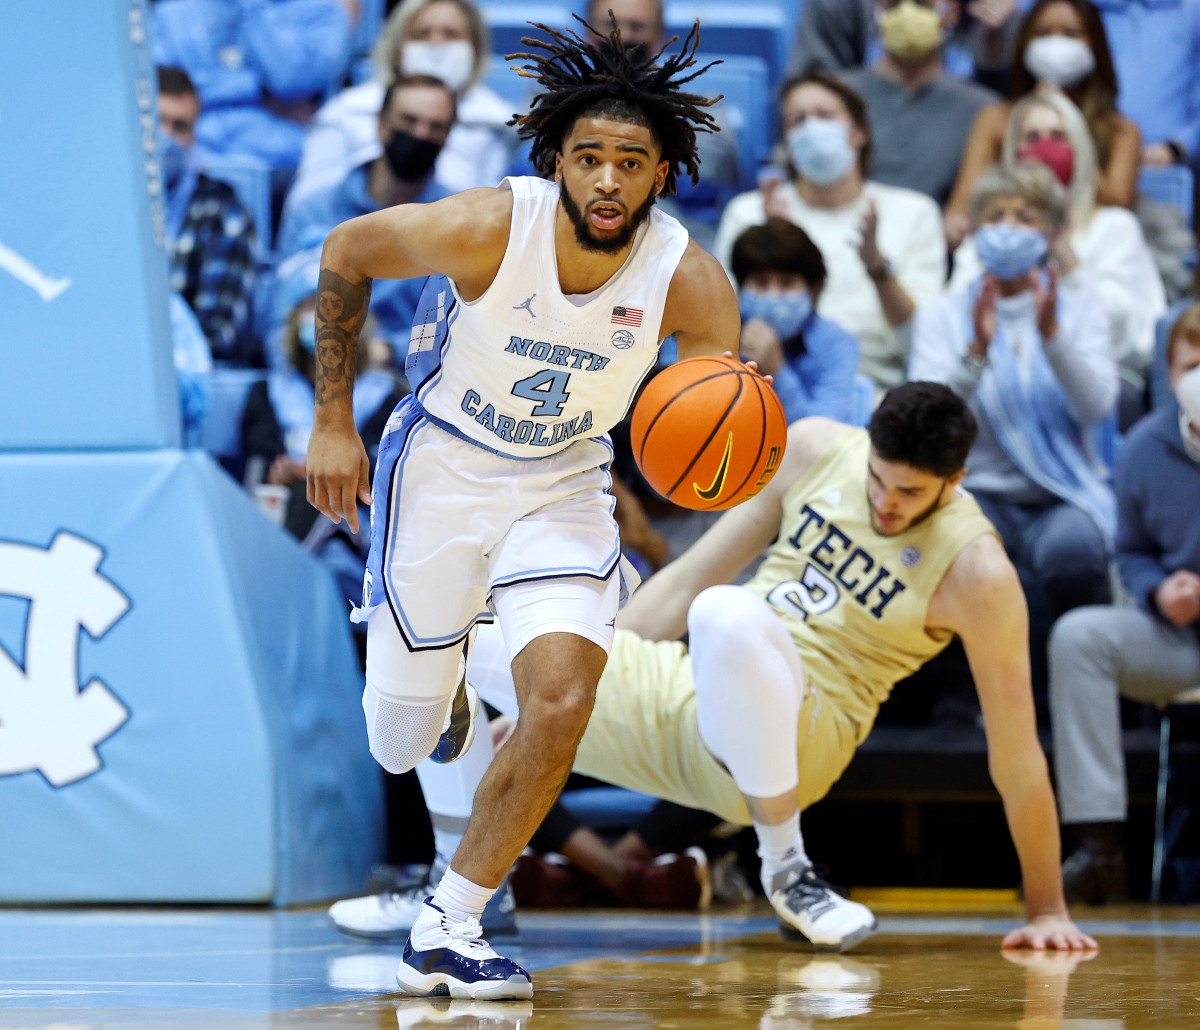 UNC Basketball: The Tar Heels Desperately Need RJ Davis to Be the X-Factor If They Hope to Make a Run in March